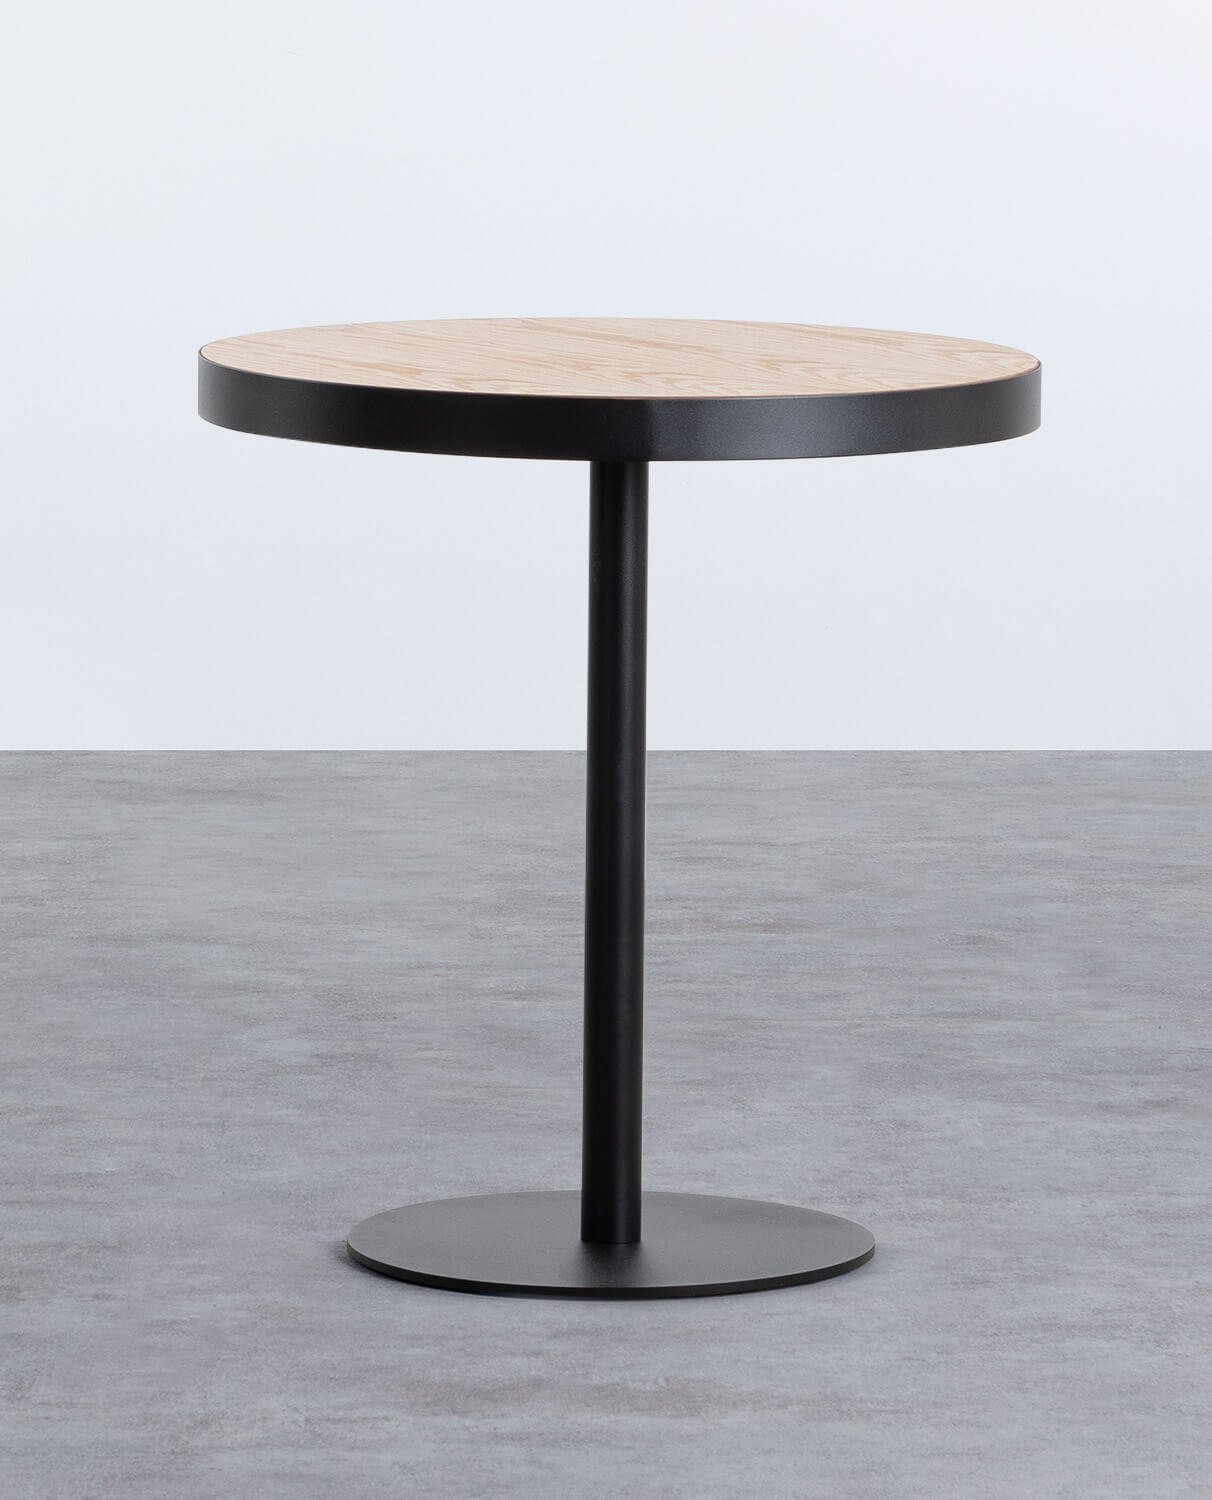 Round Wood and Steel Table (Ø70 cm) Zoar, gallery image 1